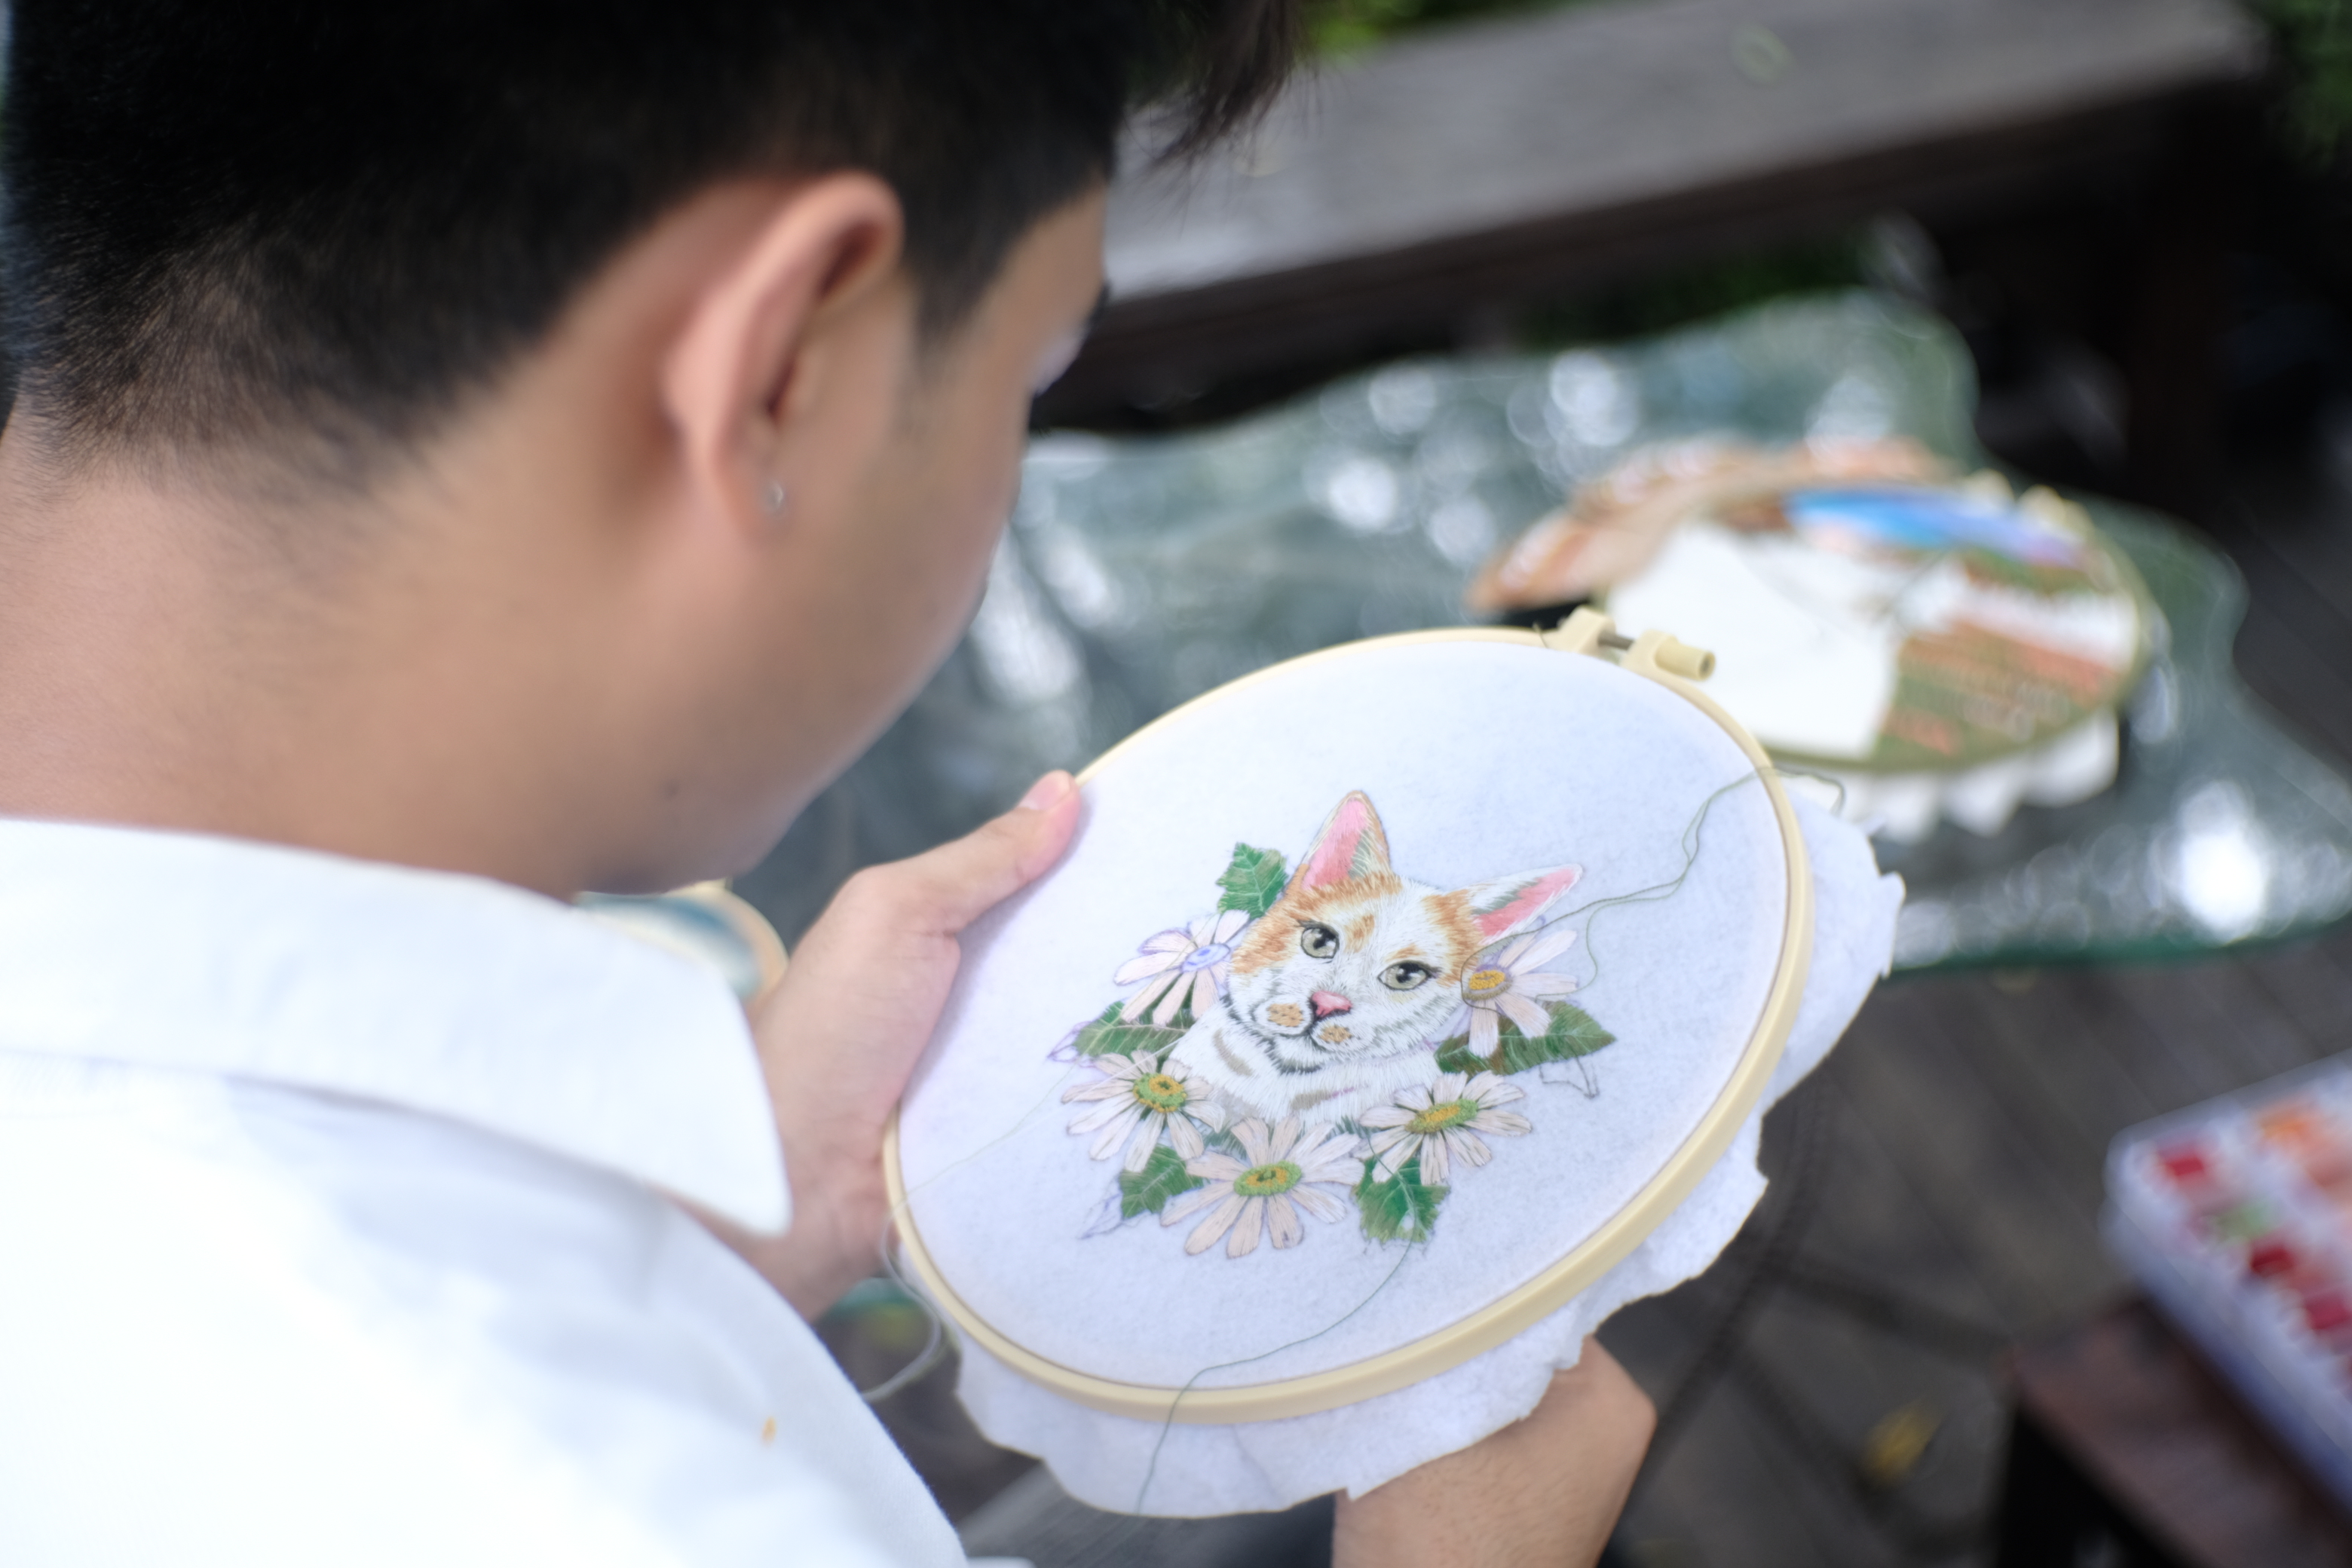 Thach Ngoc Phuc Yen works on a piece of embroidery. Photo: Ngoc Phuong / Tuoi Tre News